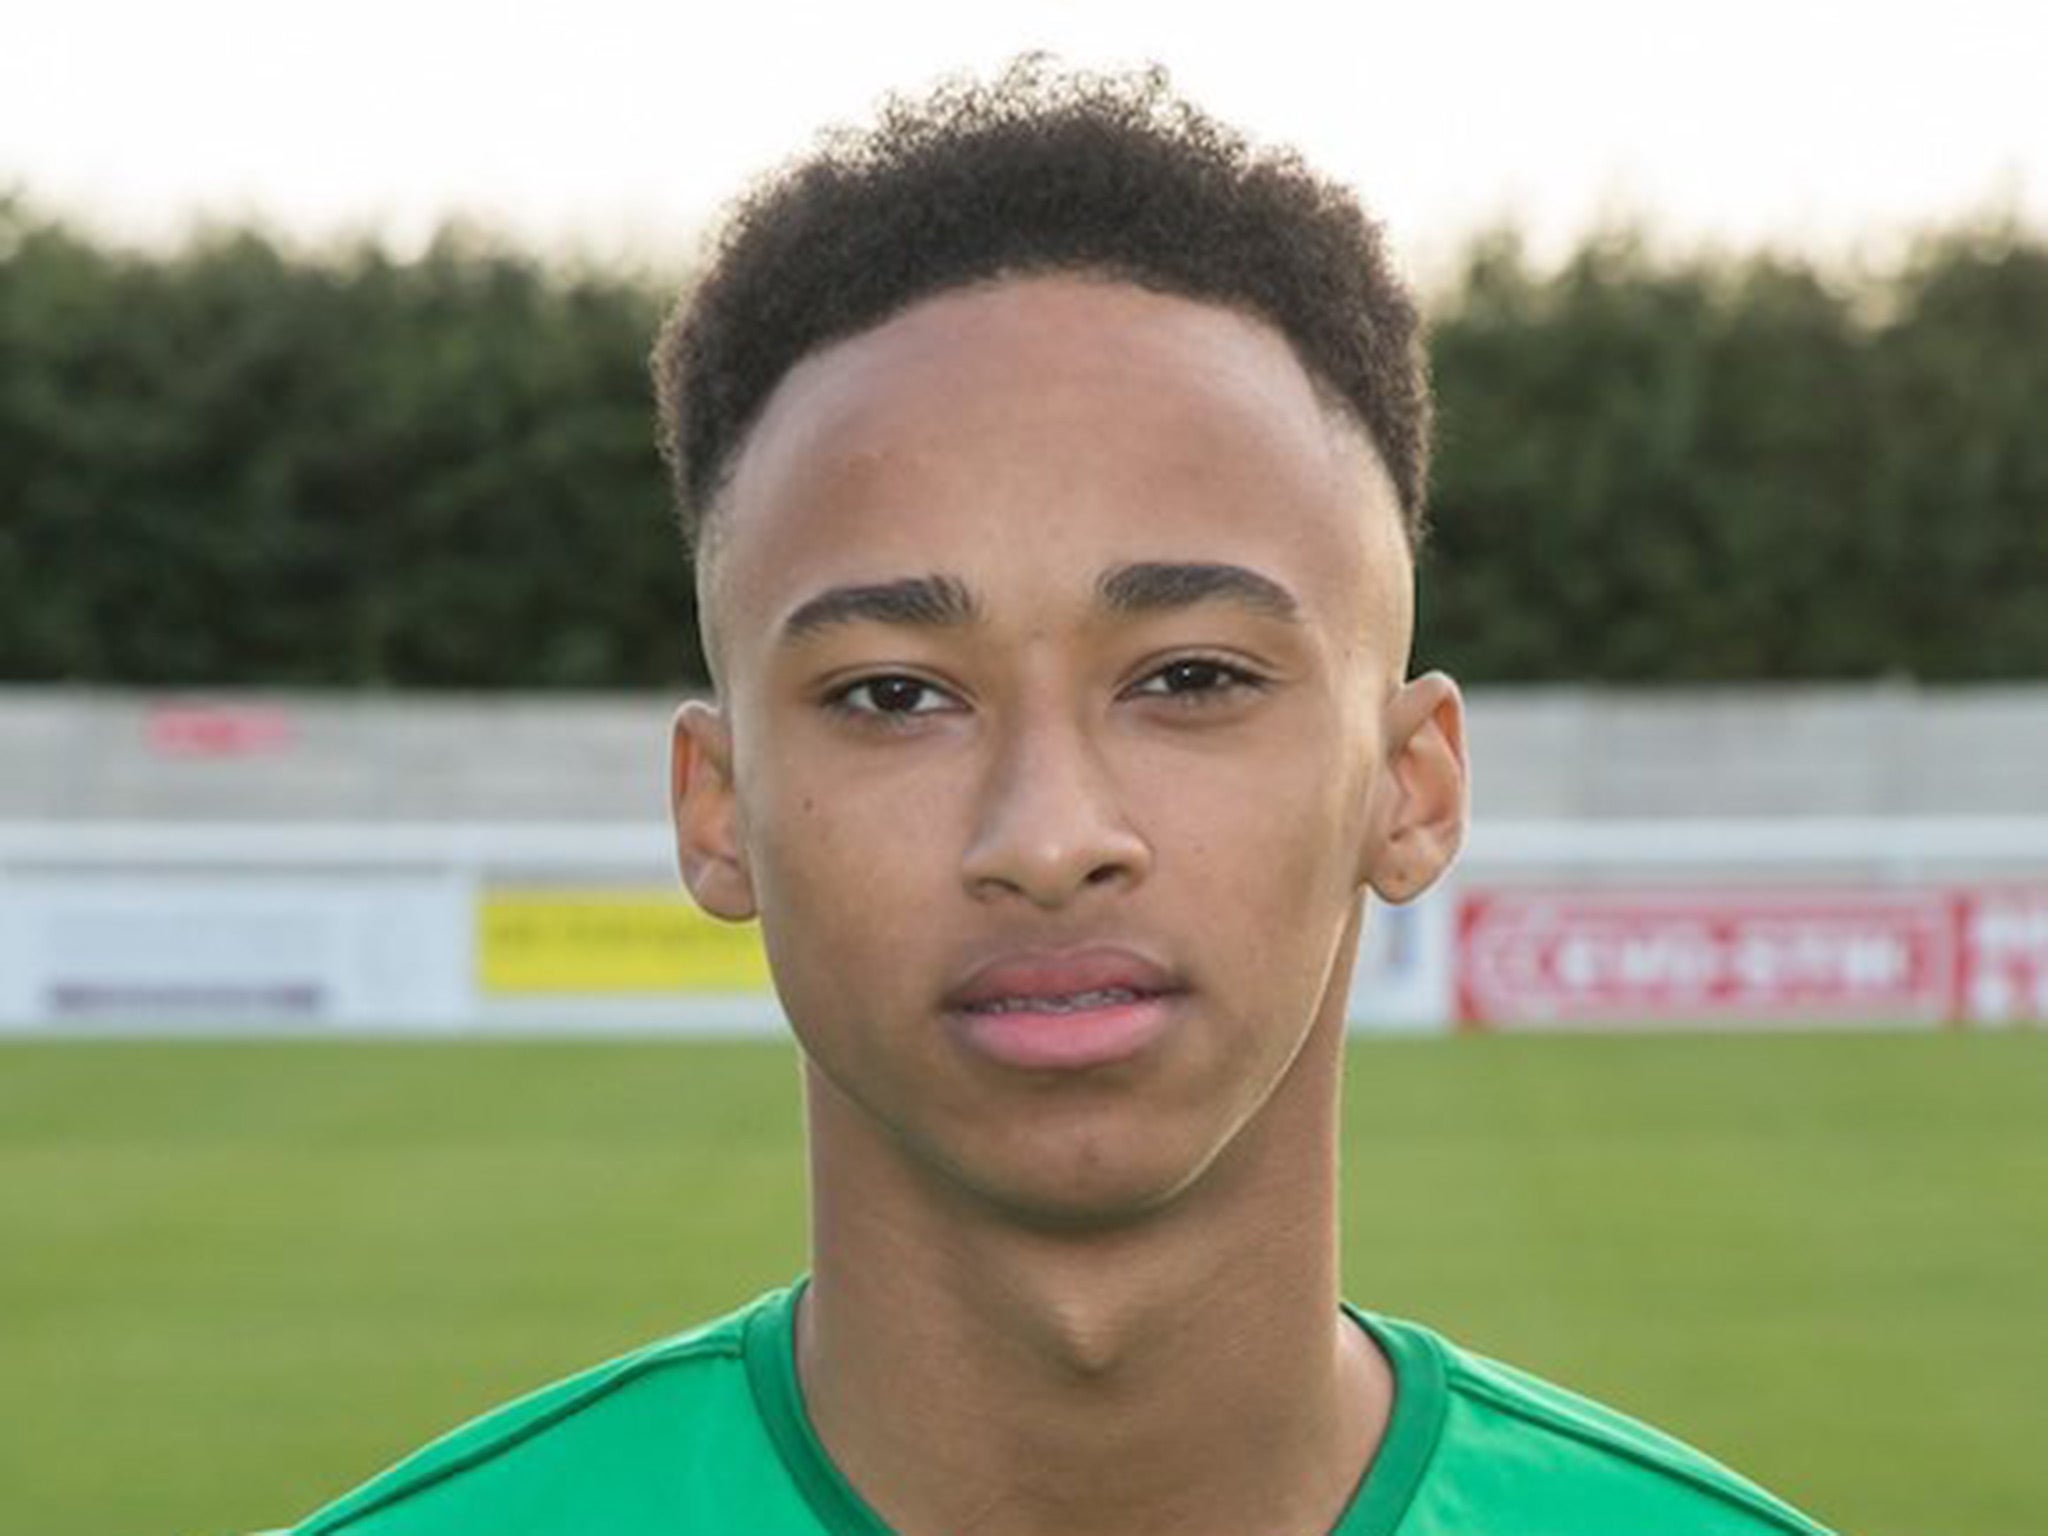 Cohen Bramall was recommended to Arsenal by former Reading manager Brian McDermott